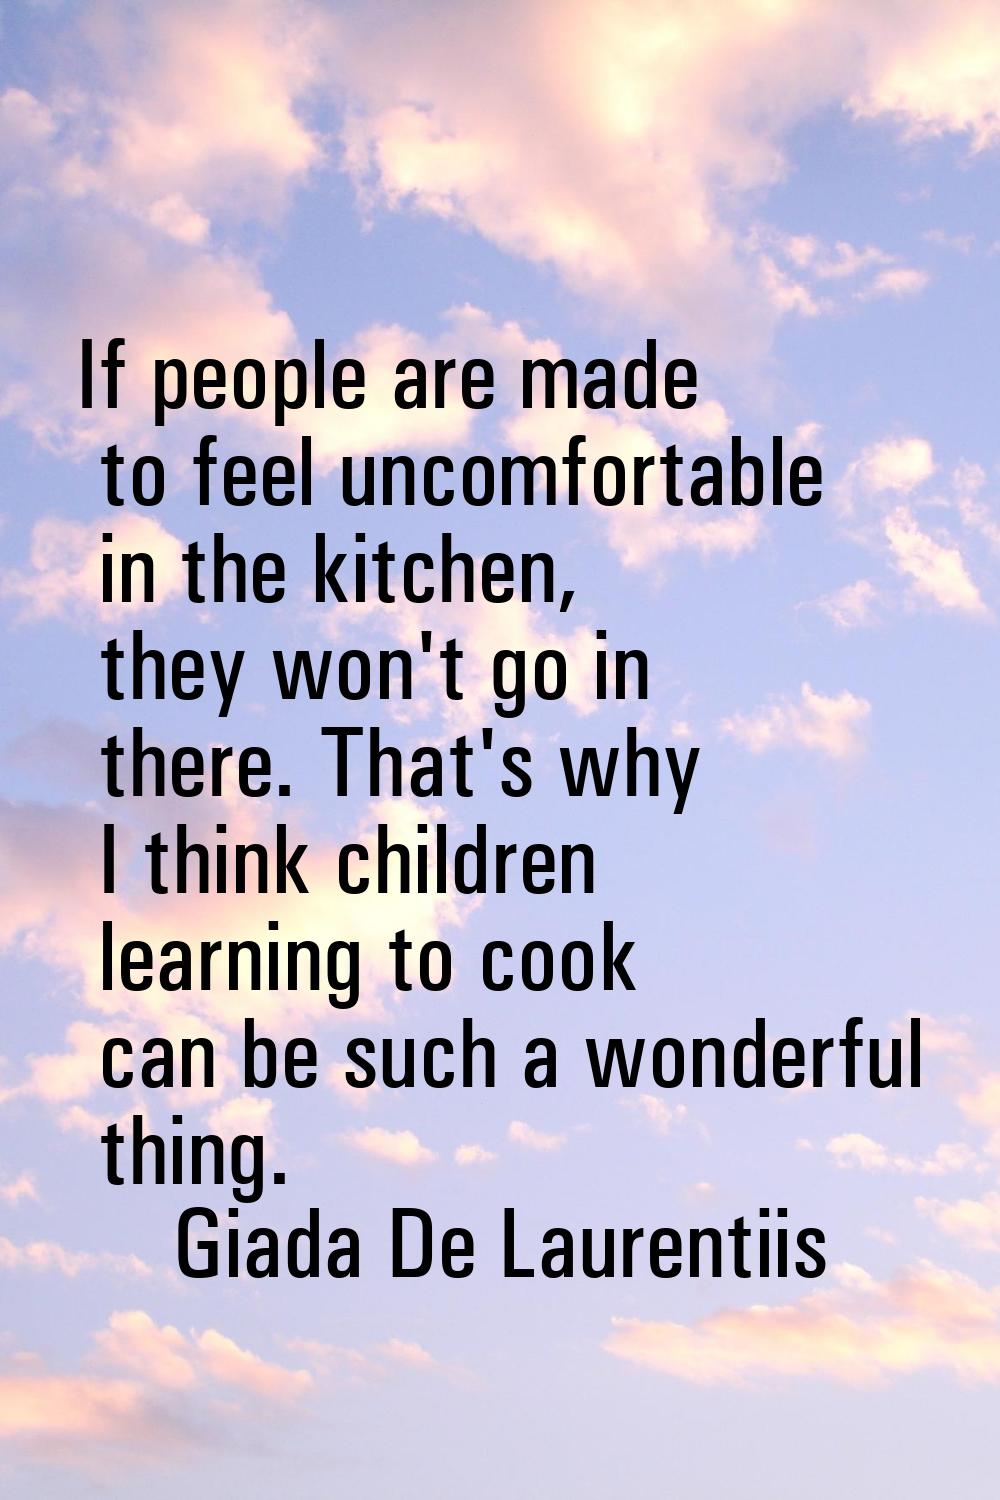 If people are made to feel uncomfortable in the kitchen, they won't go in there. That's why I think